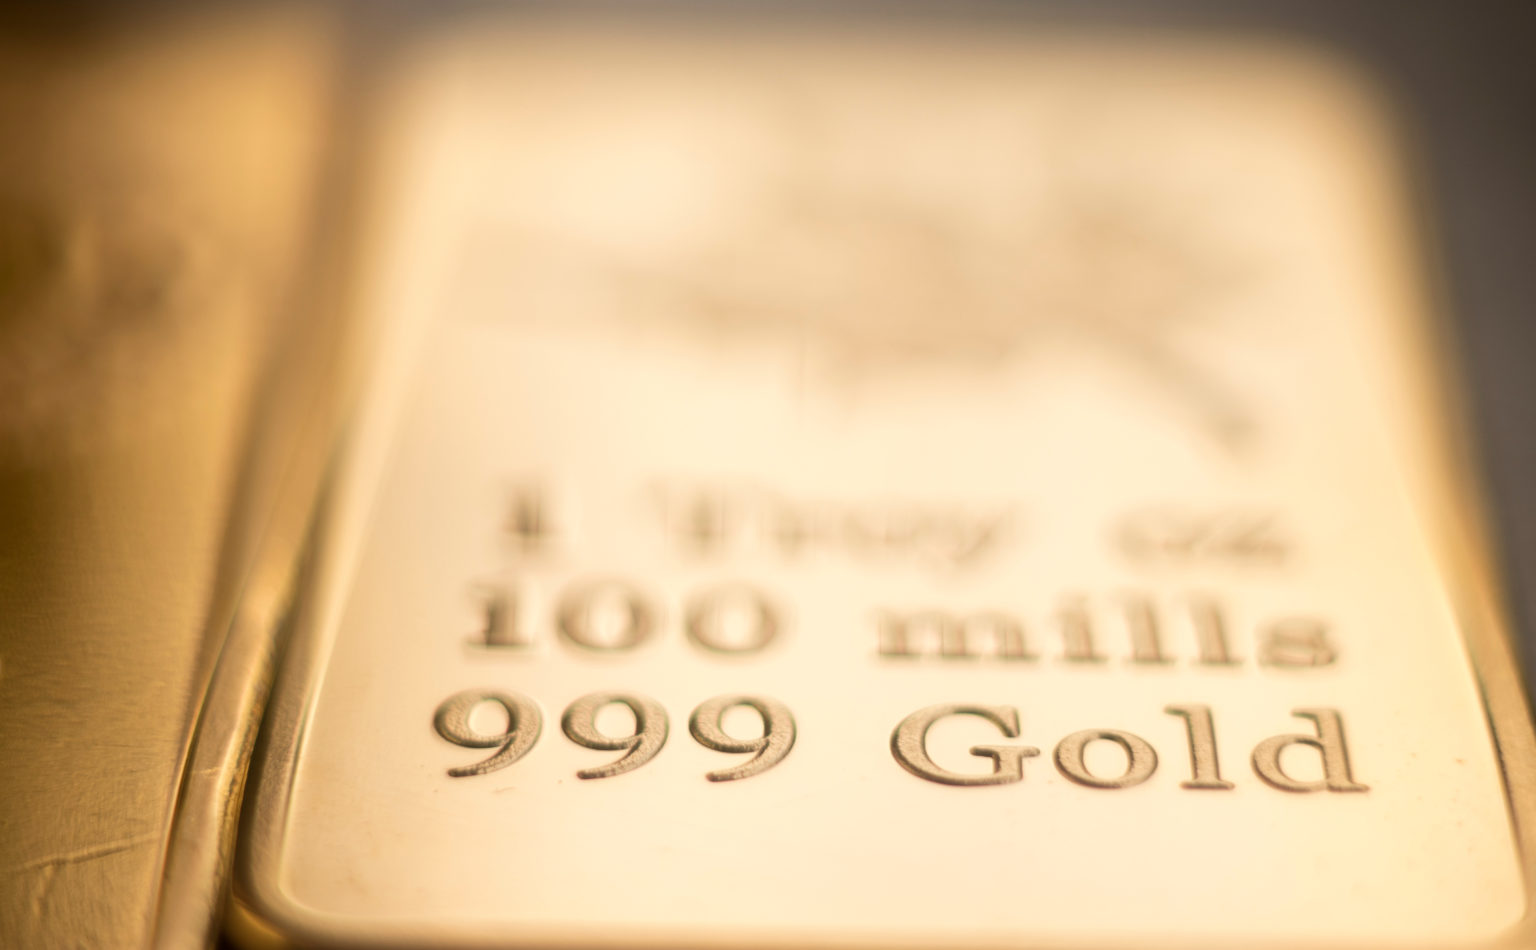 Debt ceiling negotiations have investors eyeing gold if US defaults